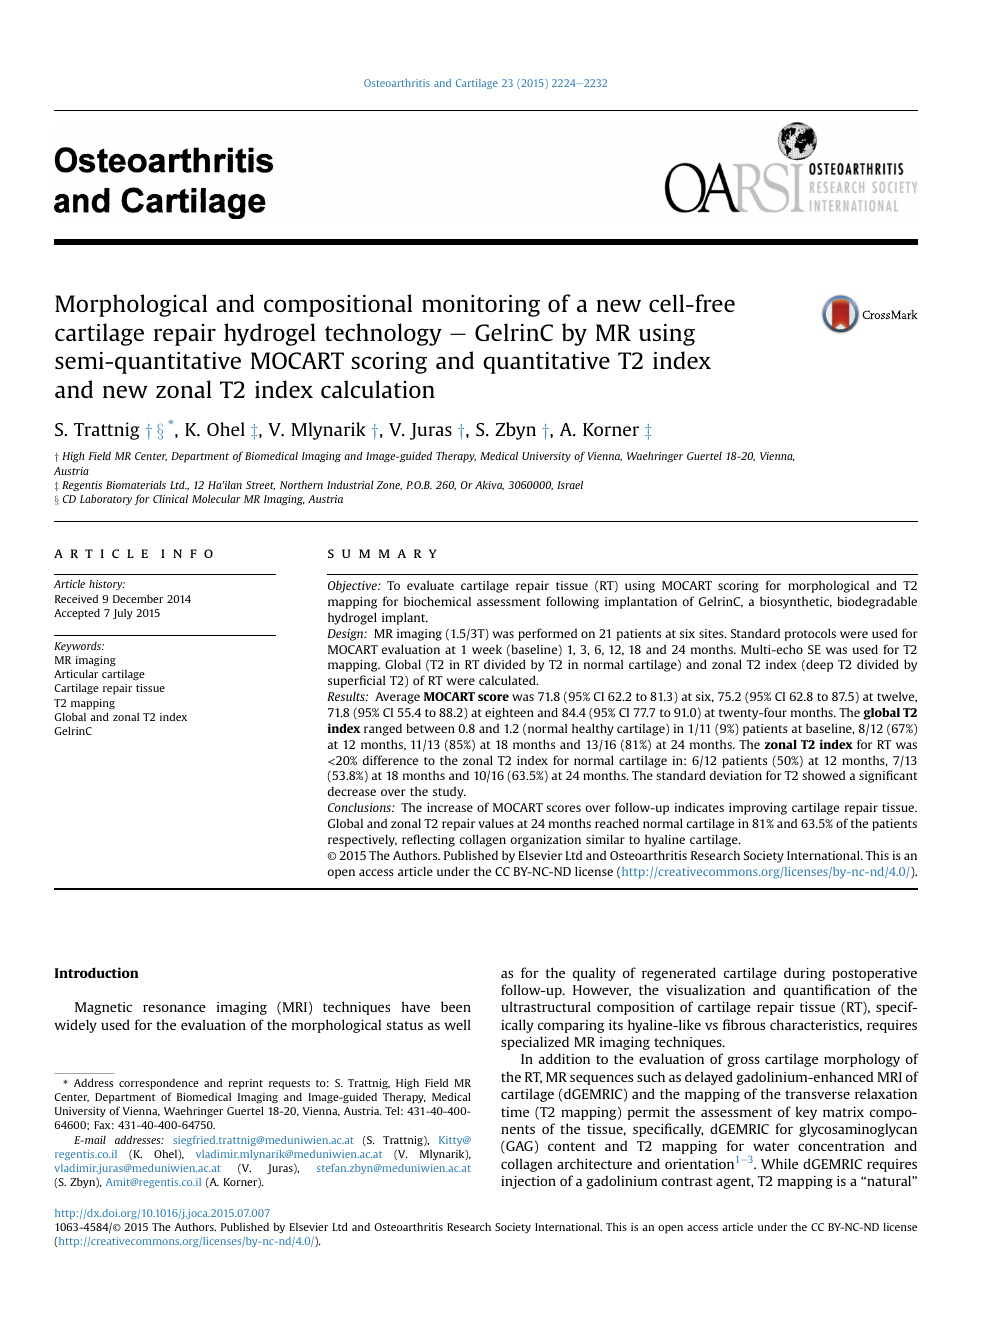 Morphological And Compositional Monitoring Of A New Cell Free Cartilage Repair Hydrogel Technology Gelrinc By Mr Using Semi Quantitative Mocart Scoring And Quantitative T2 Index And New Zonal T2 Index Calculation Topic